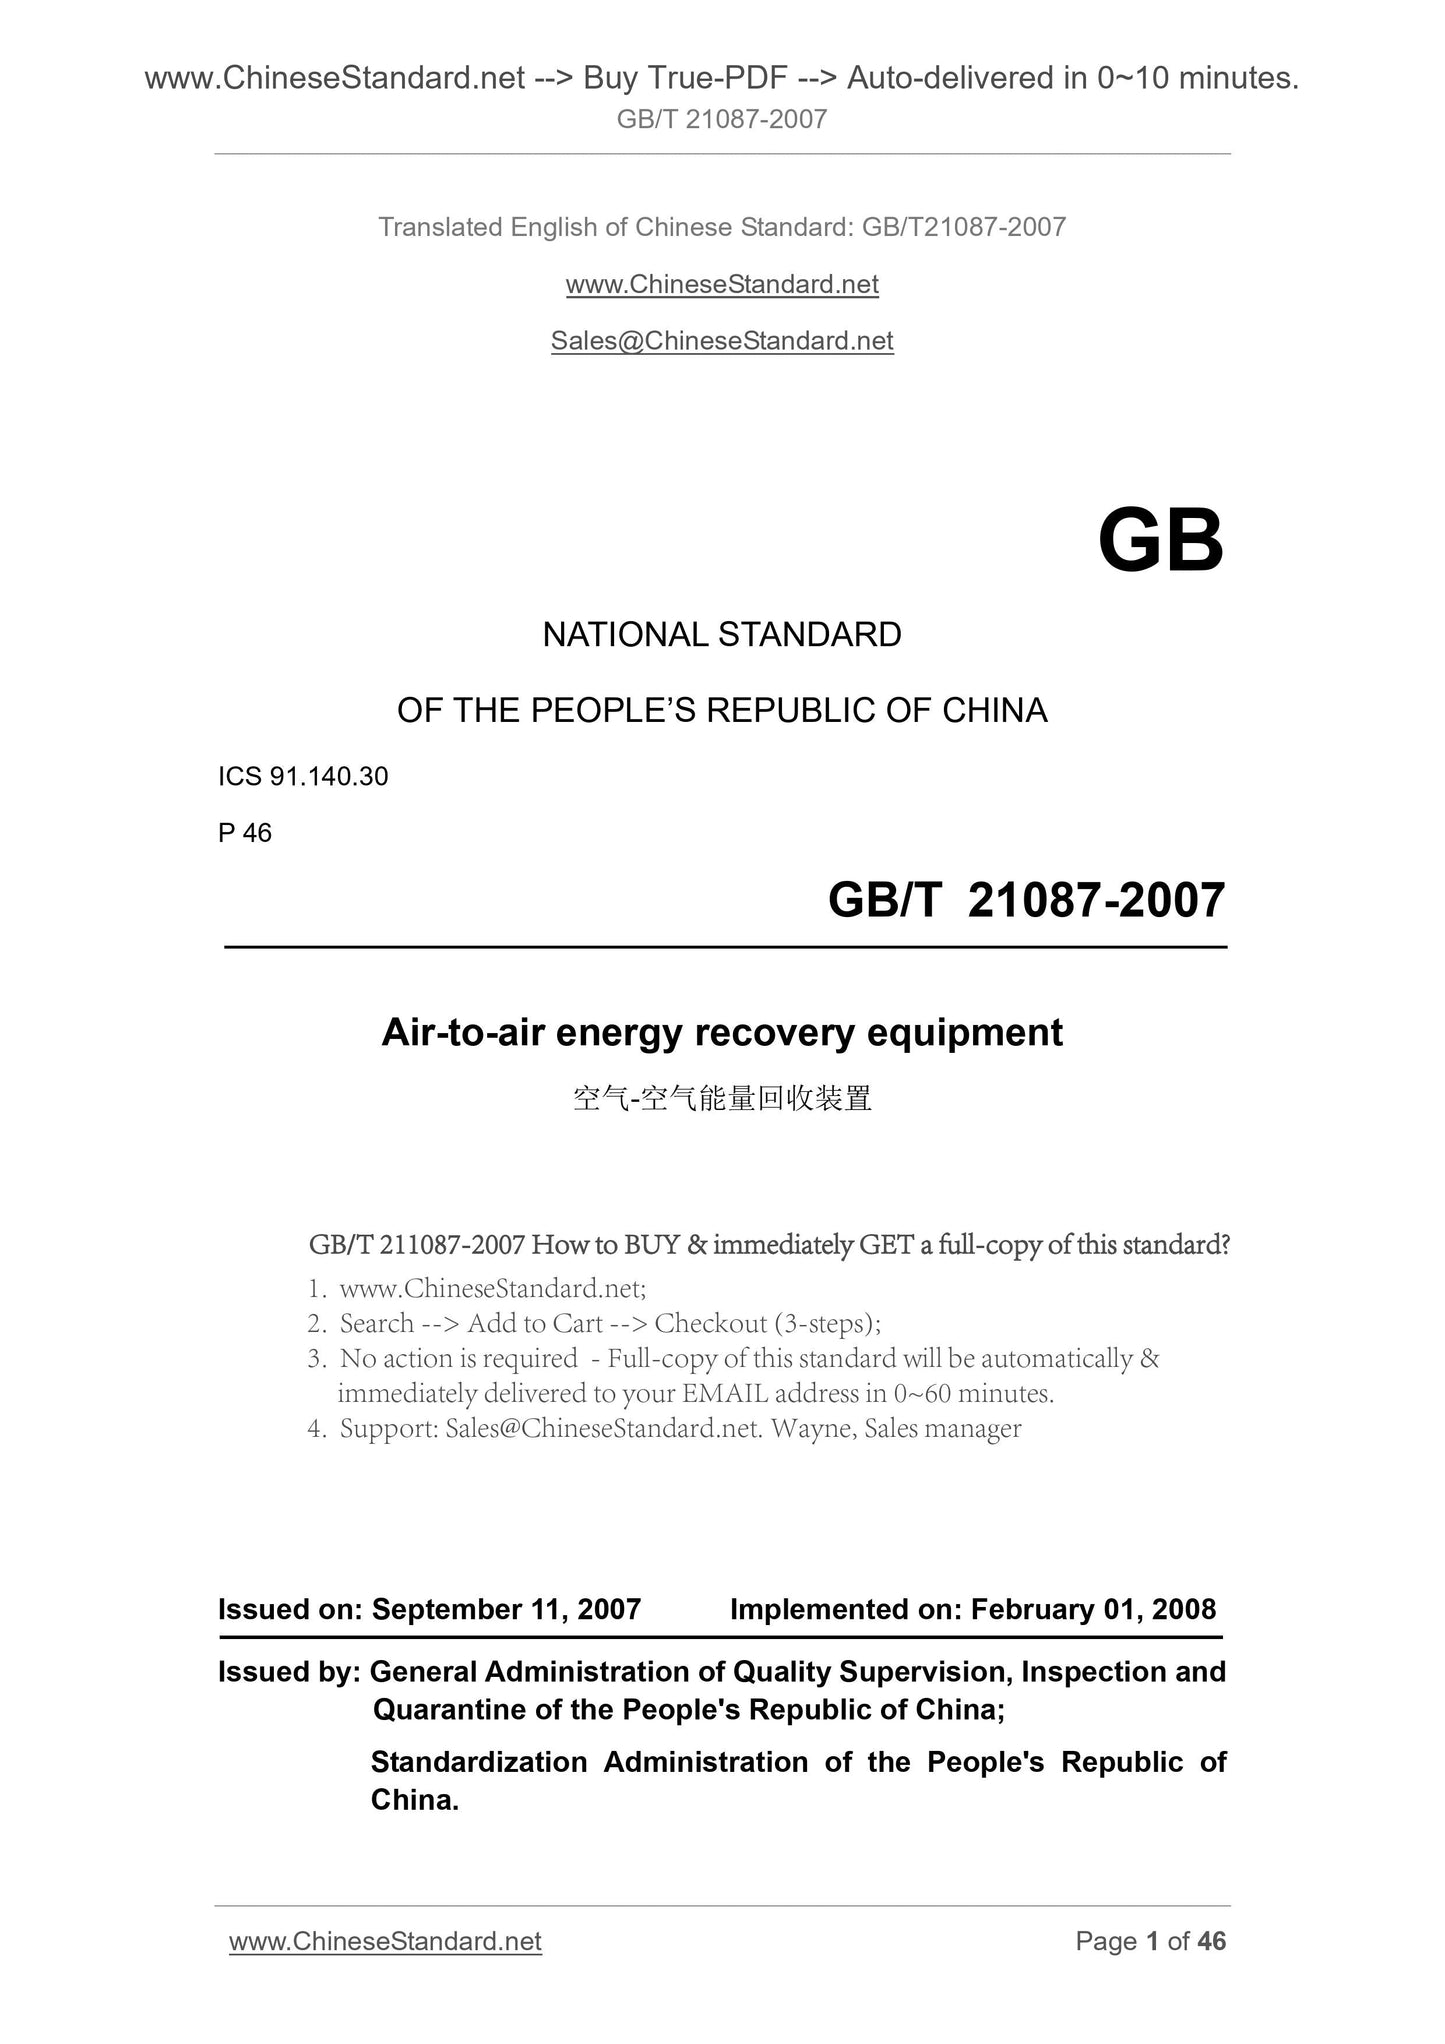 GB/T 21087-2007 Page 1